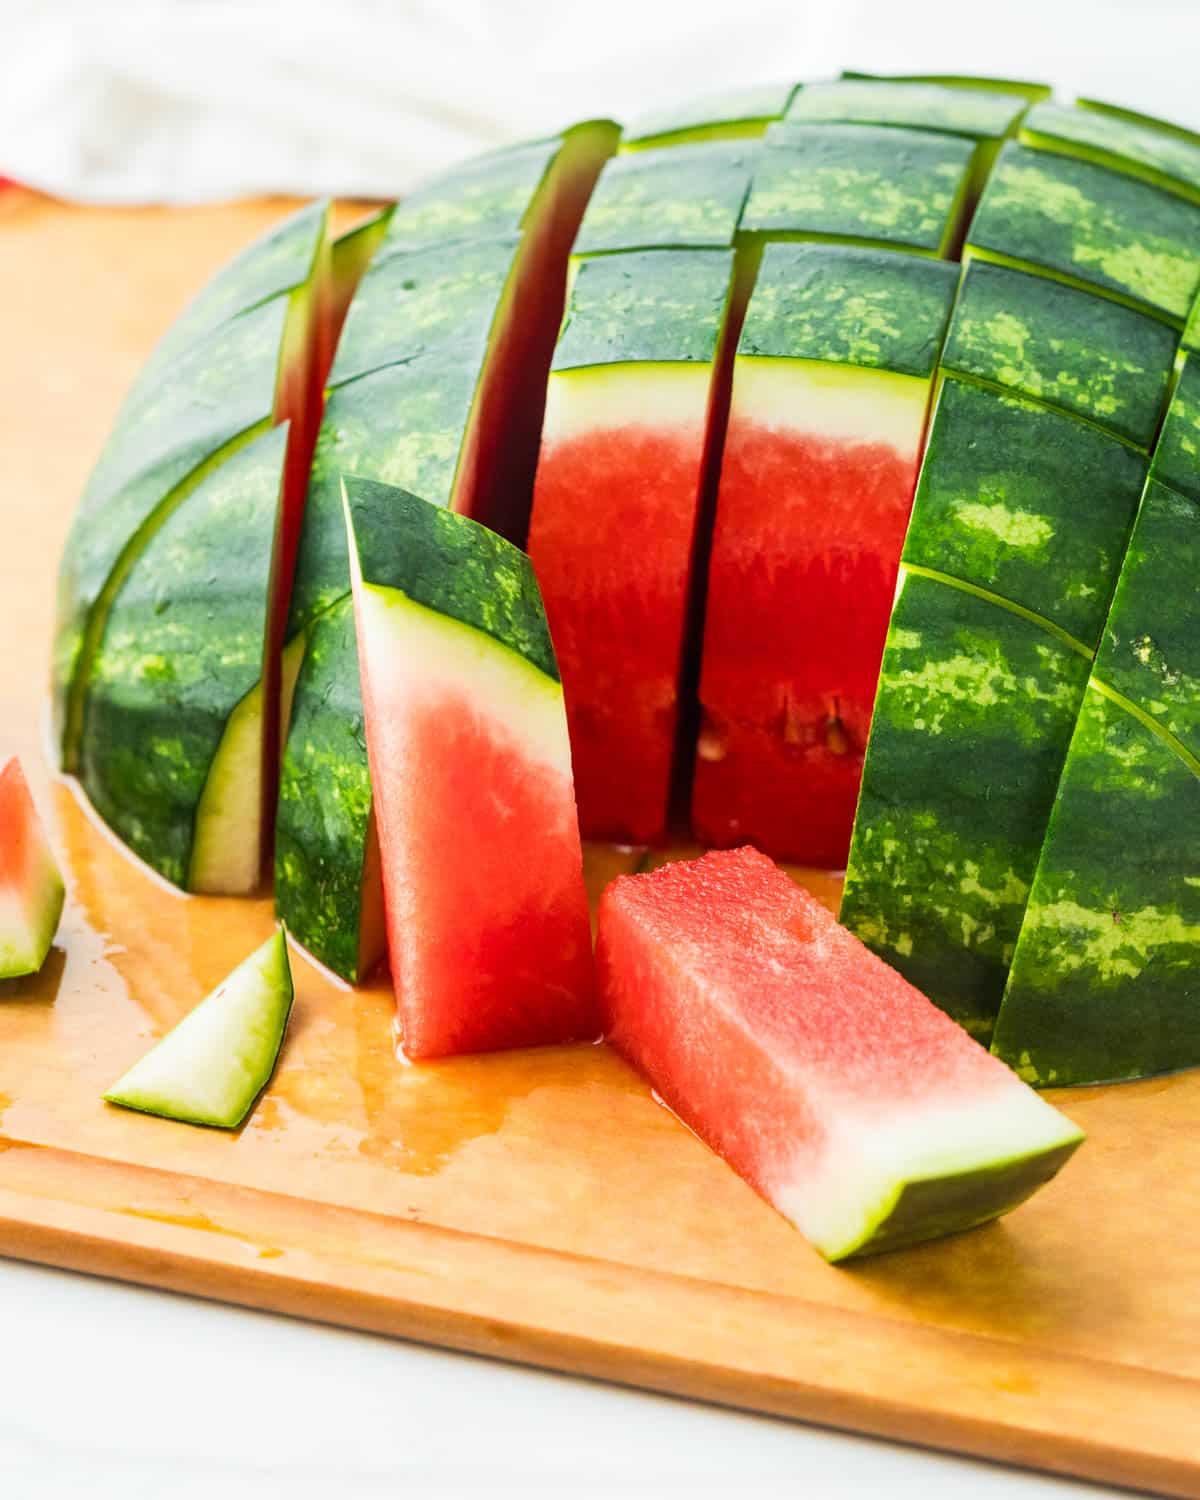 Slicing watermelon into cubes.